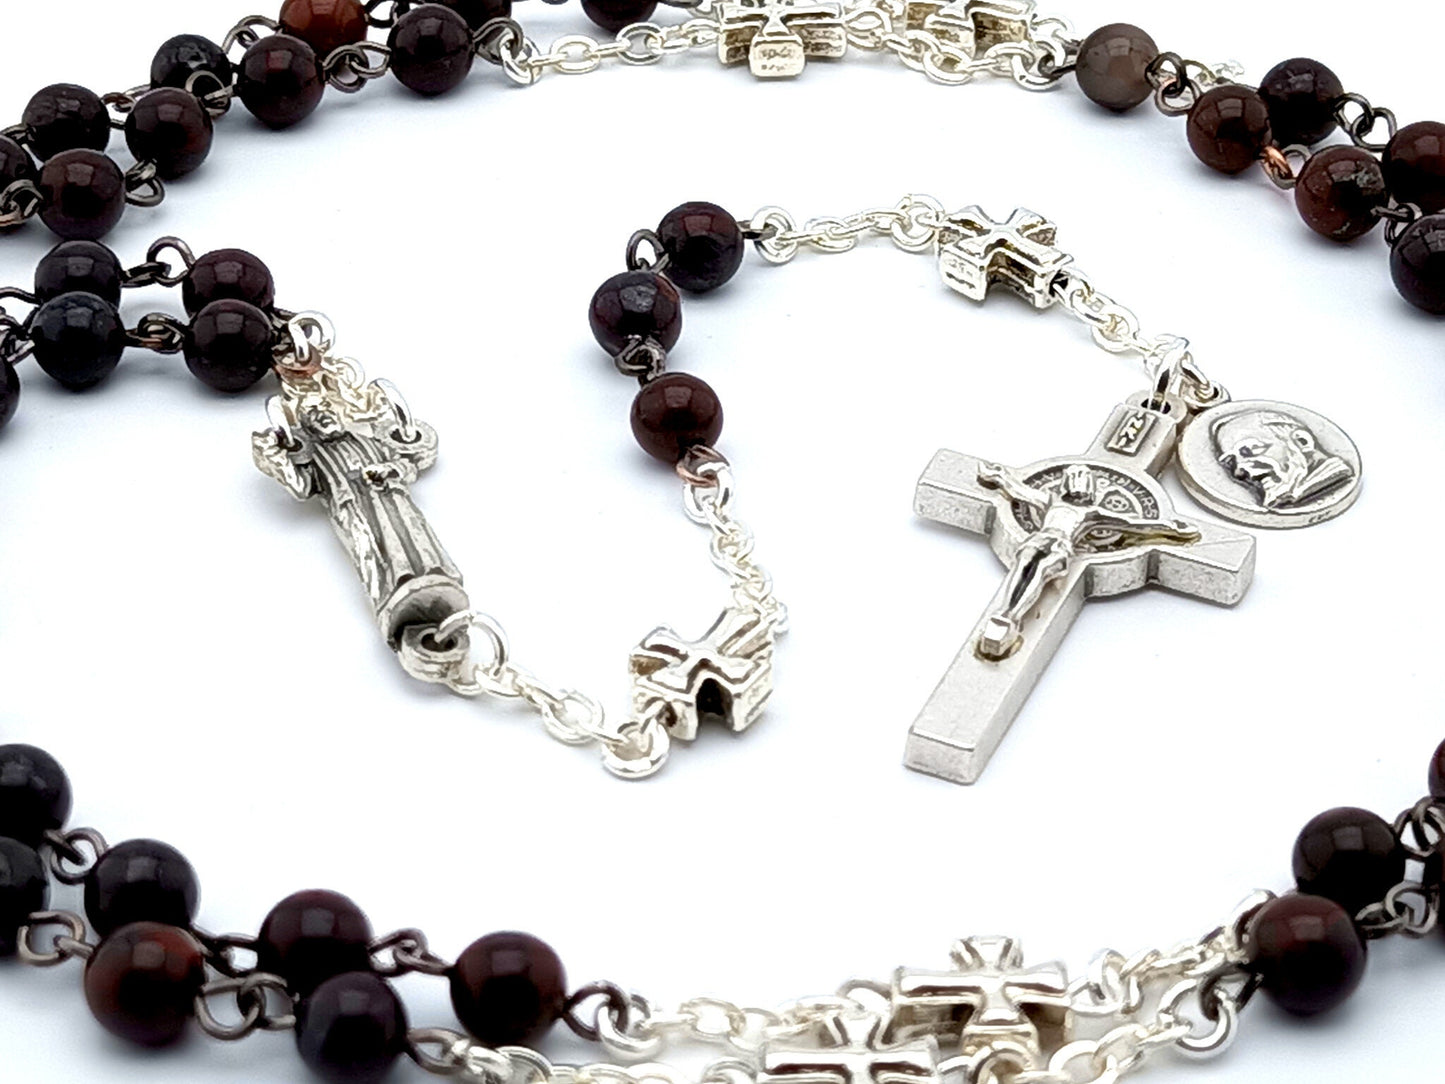 Saint Padre Pio unique rosary beads with deep red gemstone beads, silver pater beads, crucifix and statue centre medal.